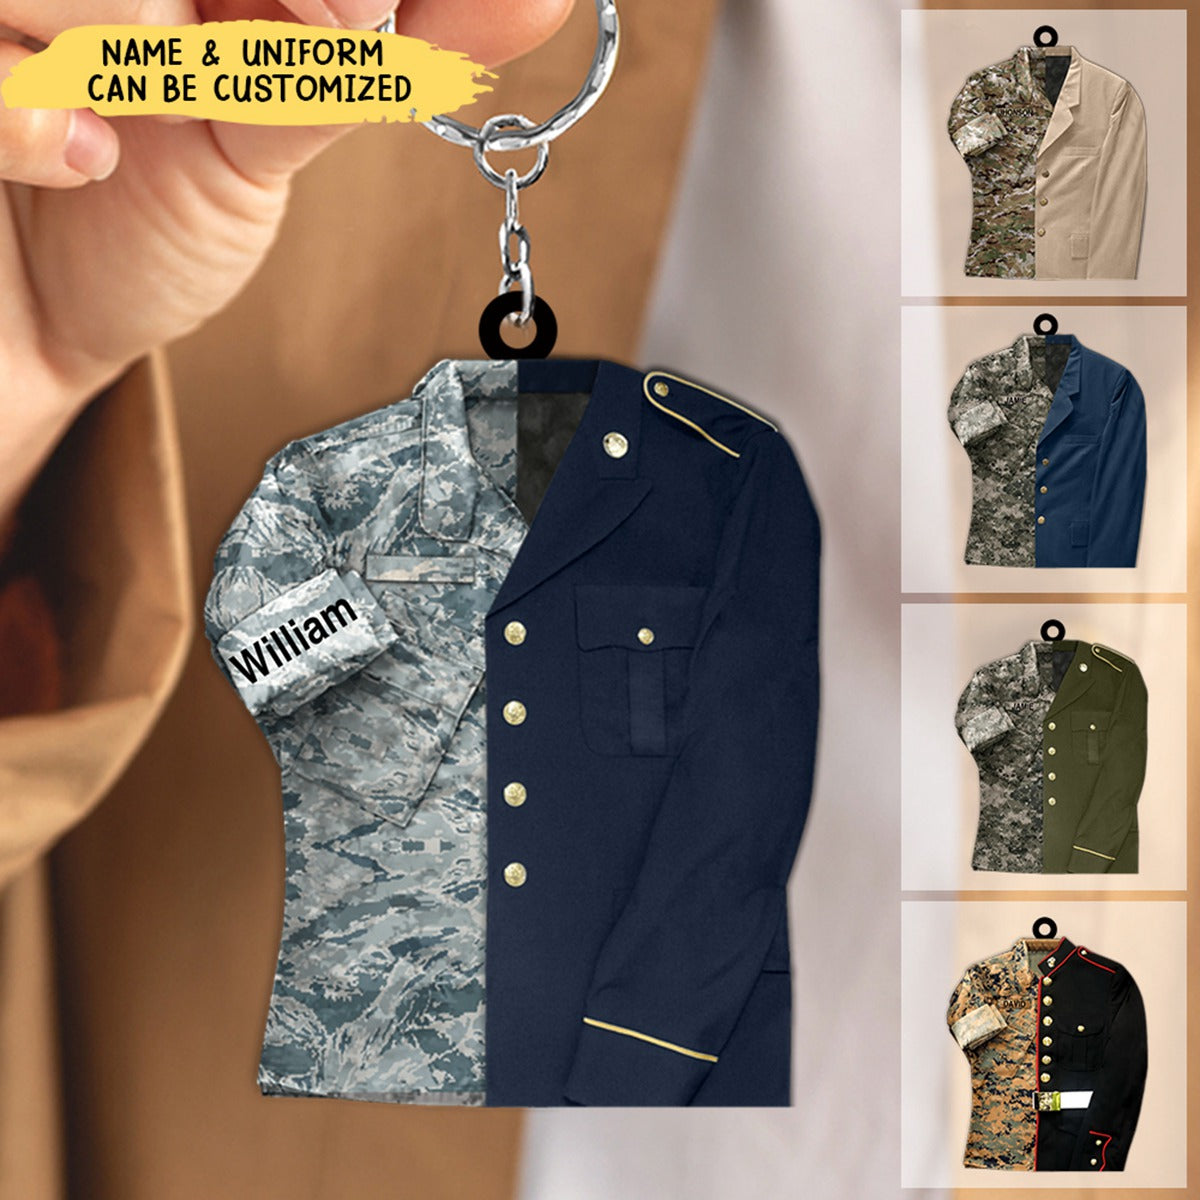 Military Camouflage and Dress Blues Uniform Personalized Acrylic Keychain For Military Veteran